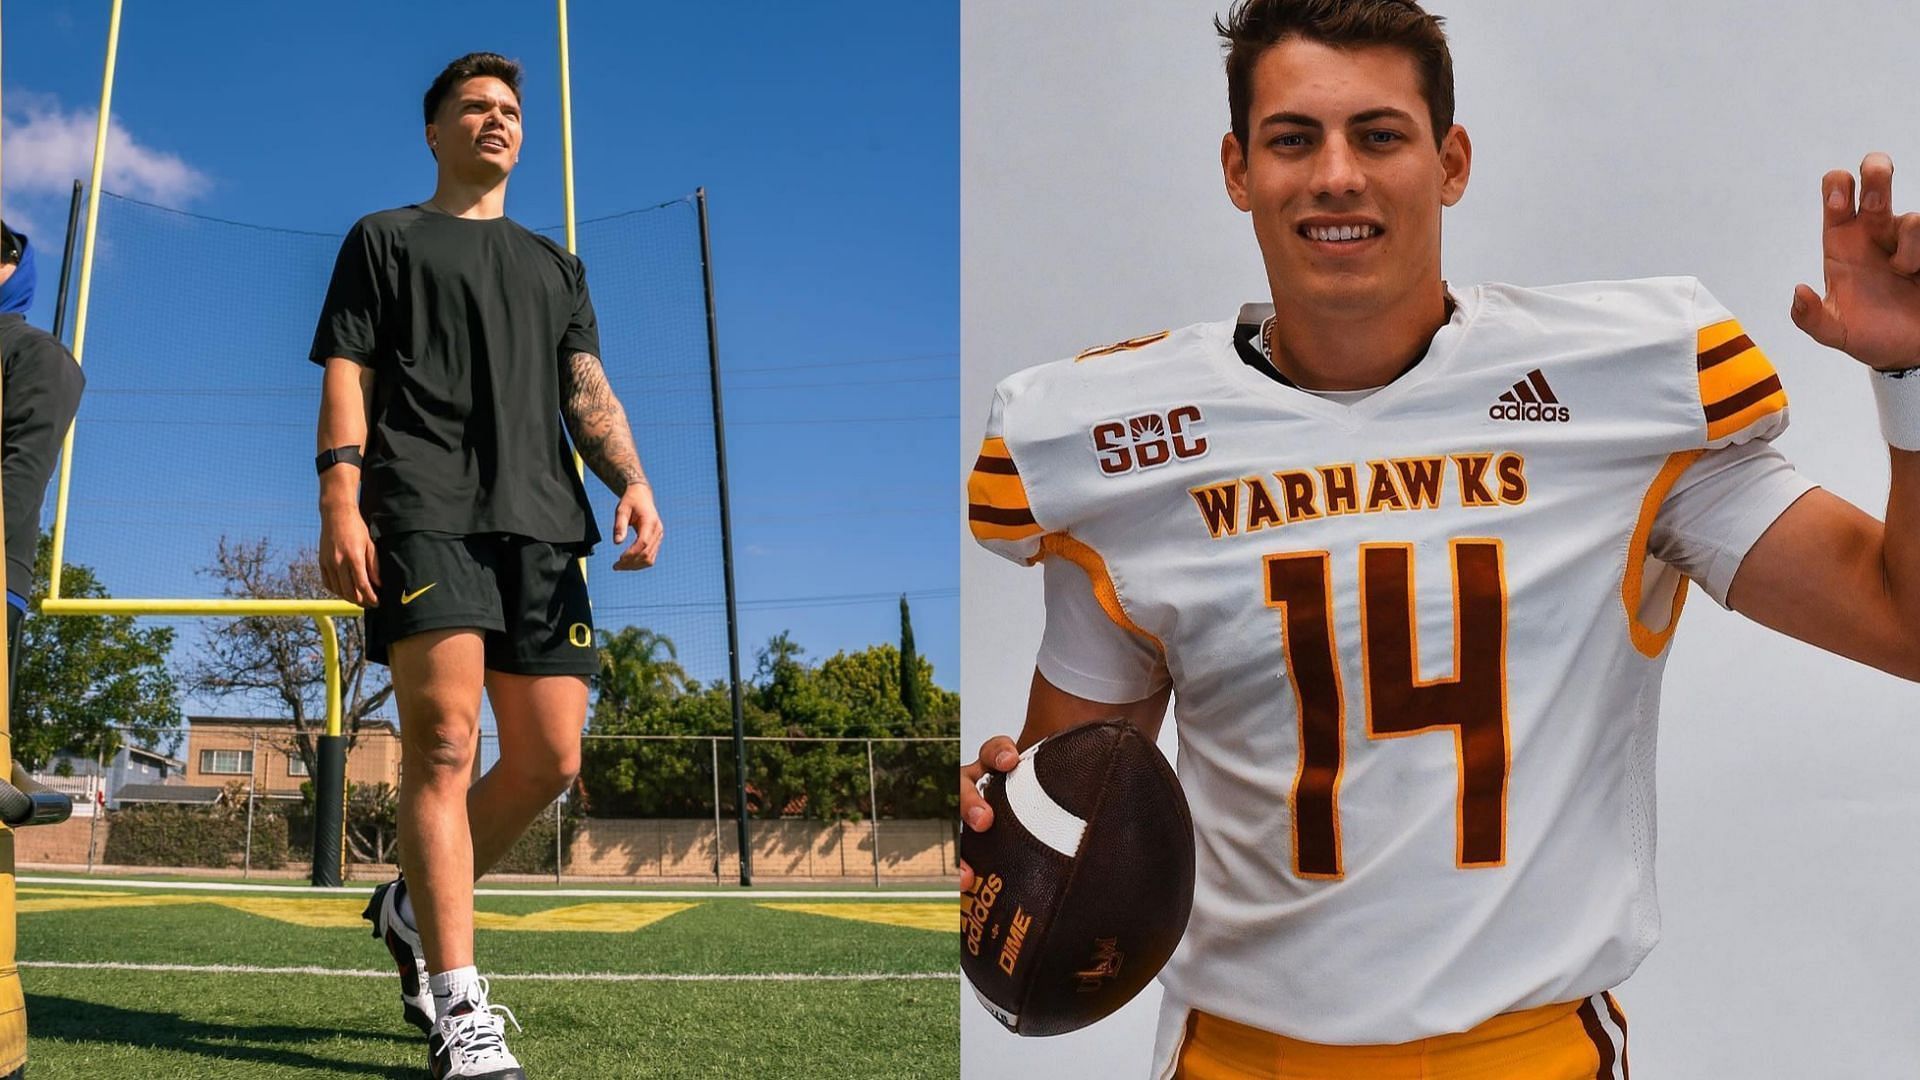 College football stars Dillon Gabriel and General Booty